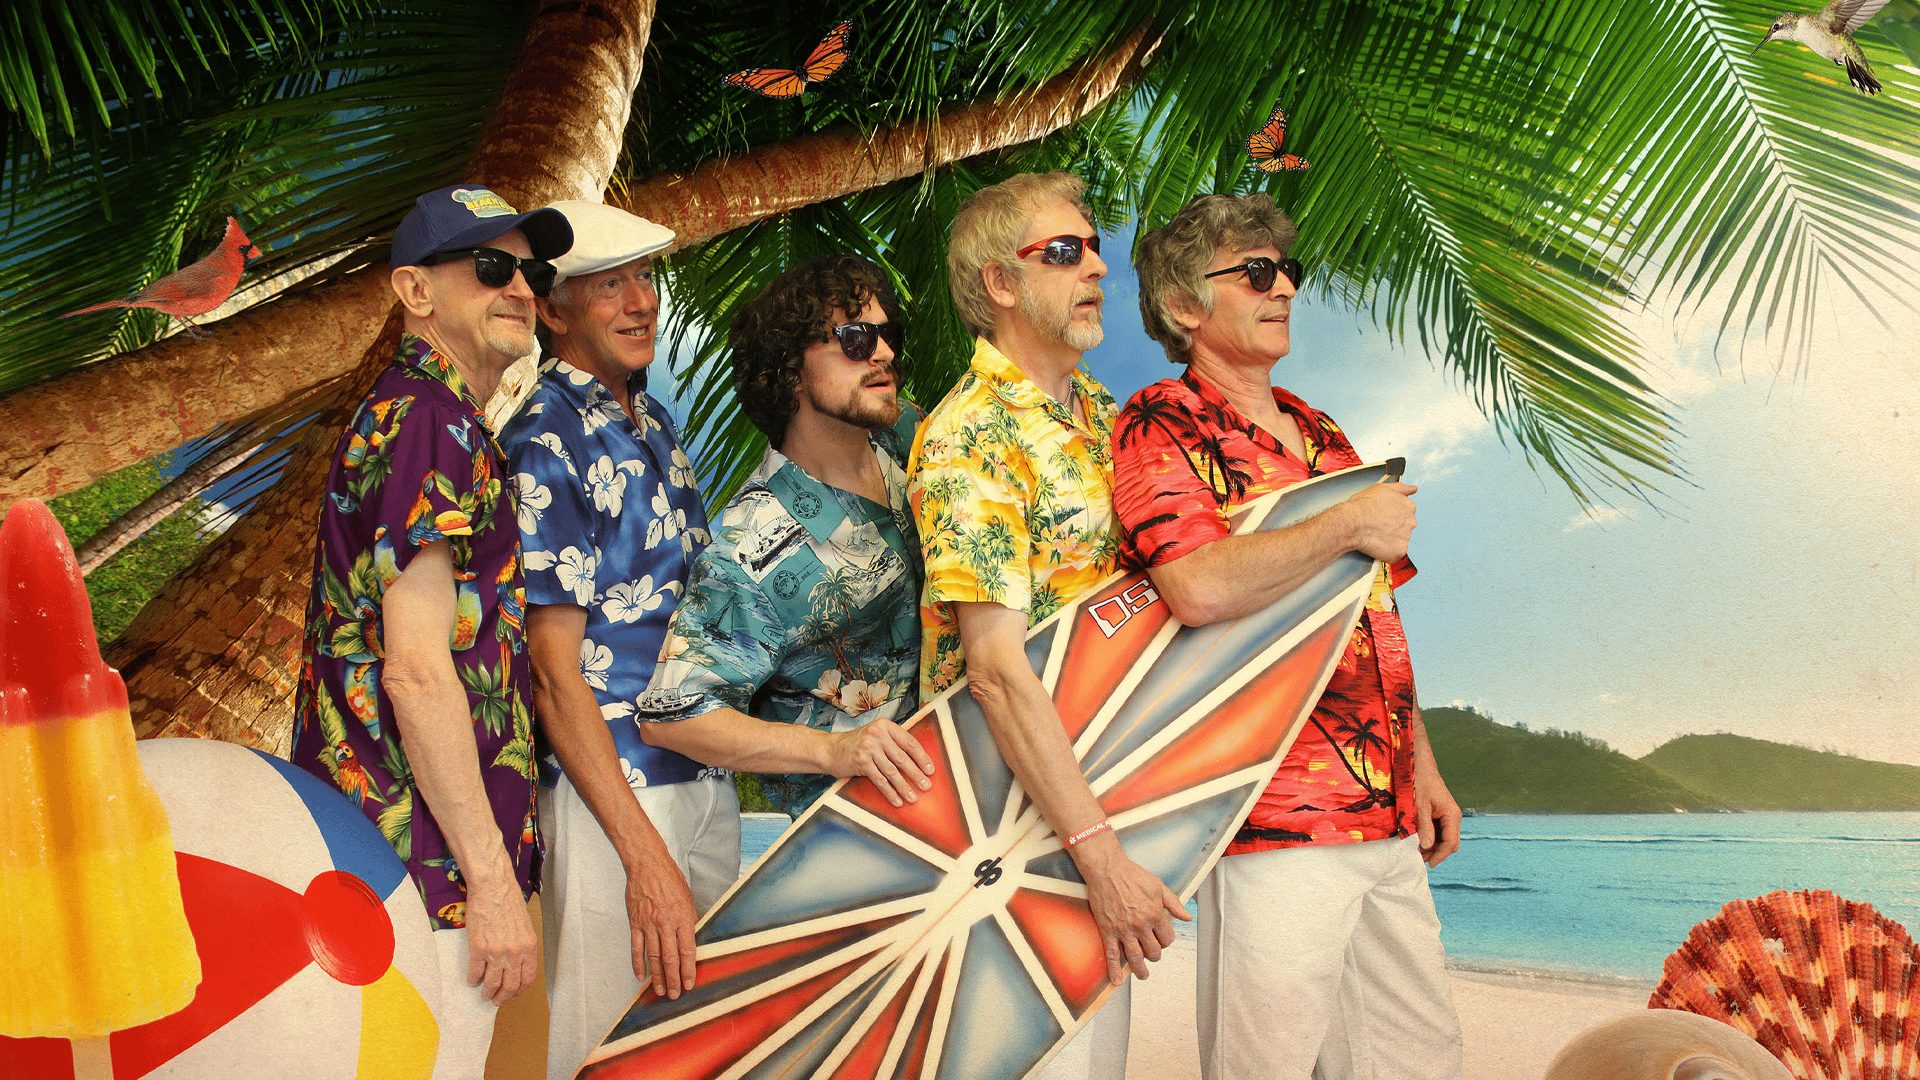 Five men in Hawaiian shirts stood holding a surf board, with a tropical beach in the background and stood under a palm tree with butterflies and birds flying around.